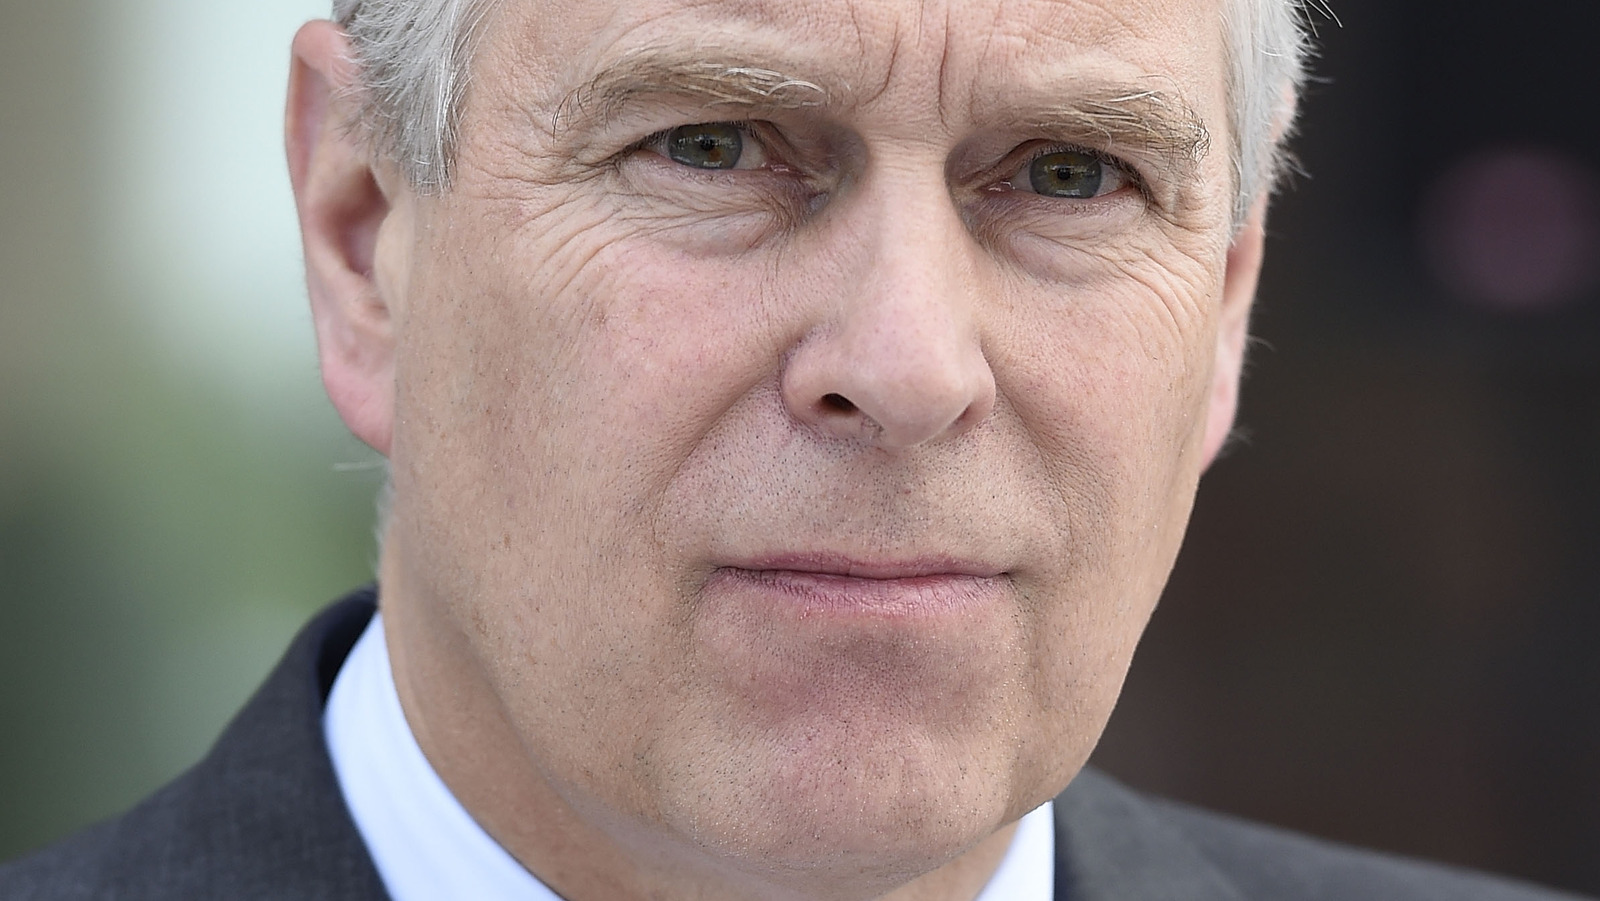 The Prince Andrew Controversy Continues To Get Worse